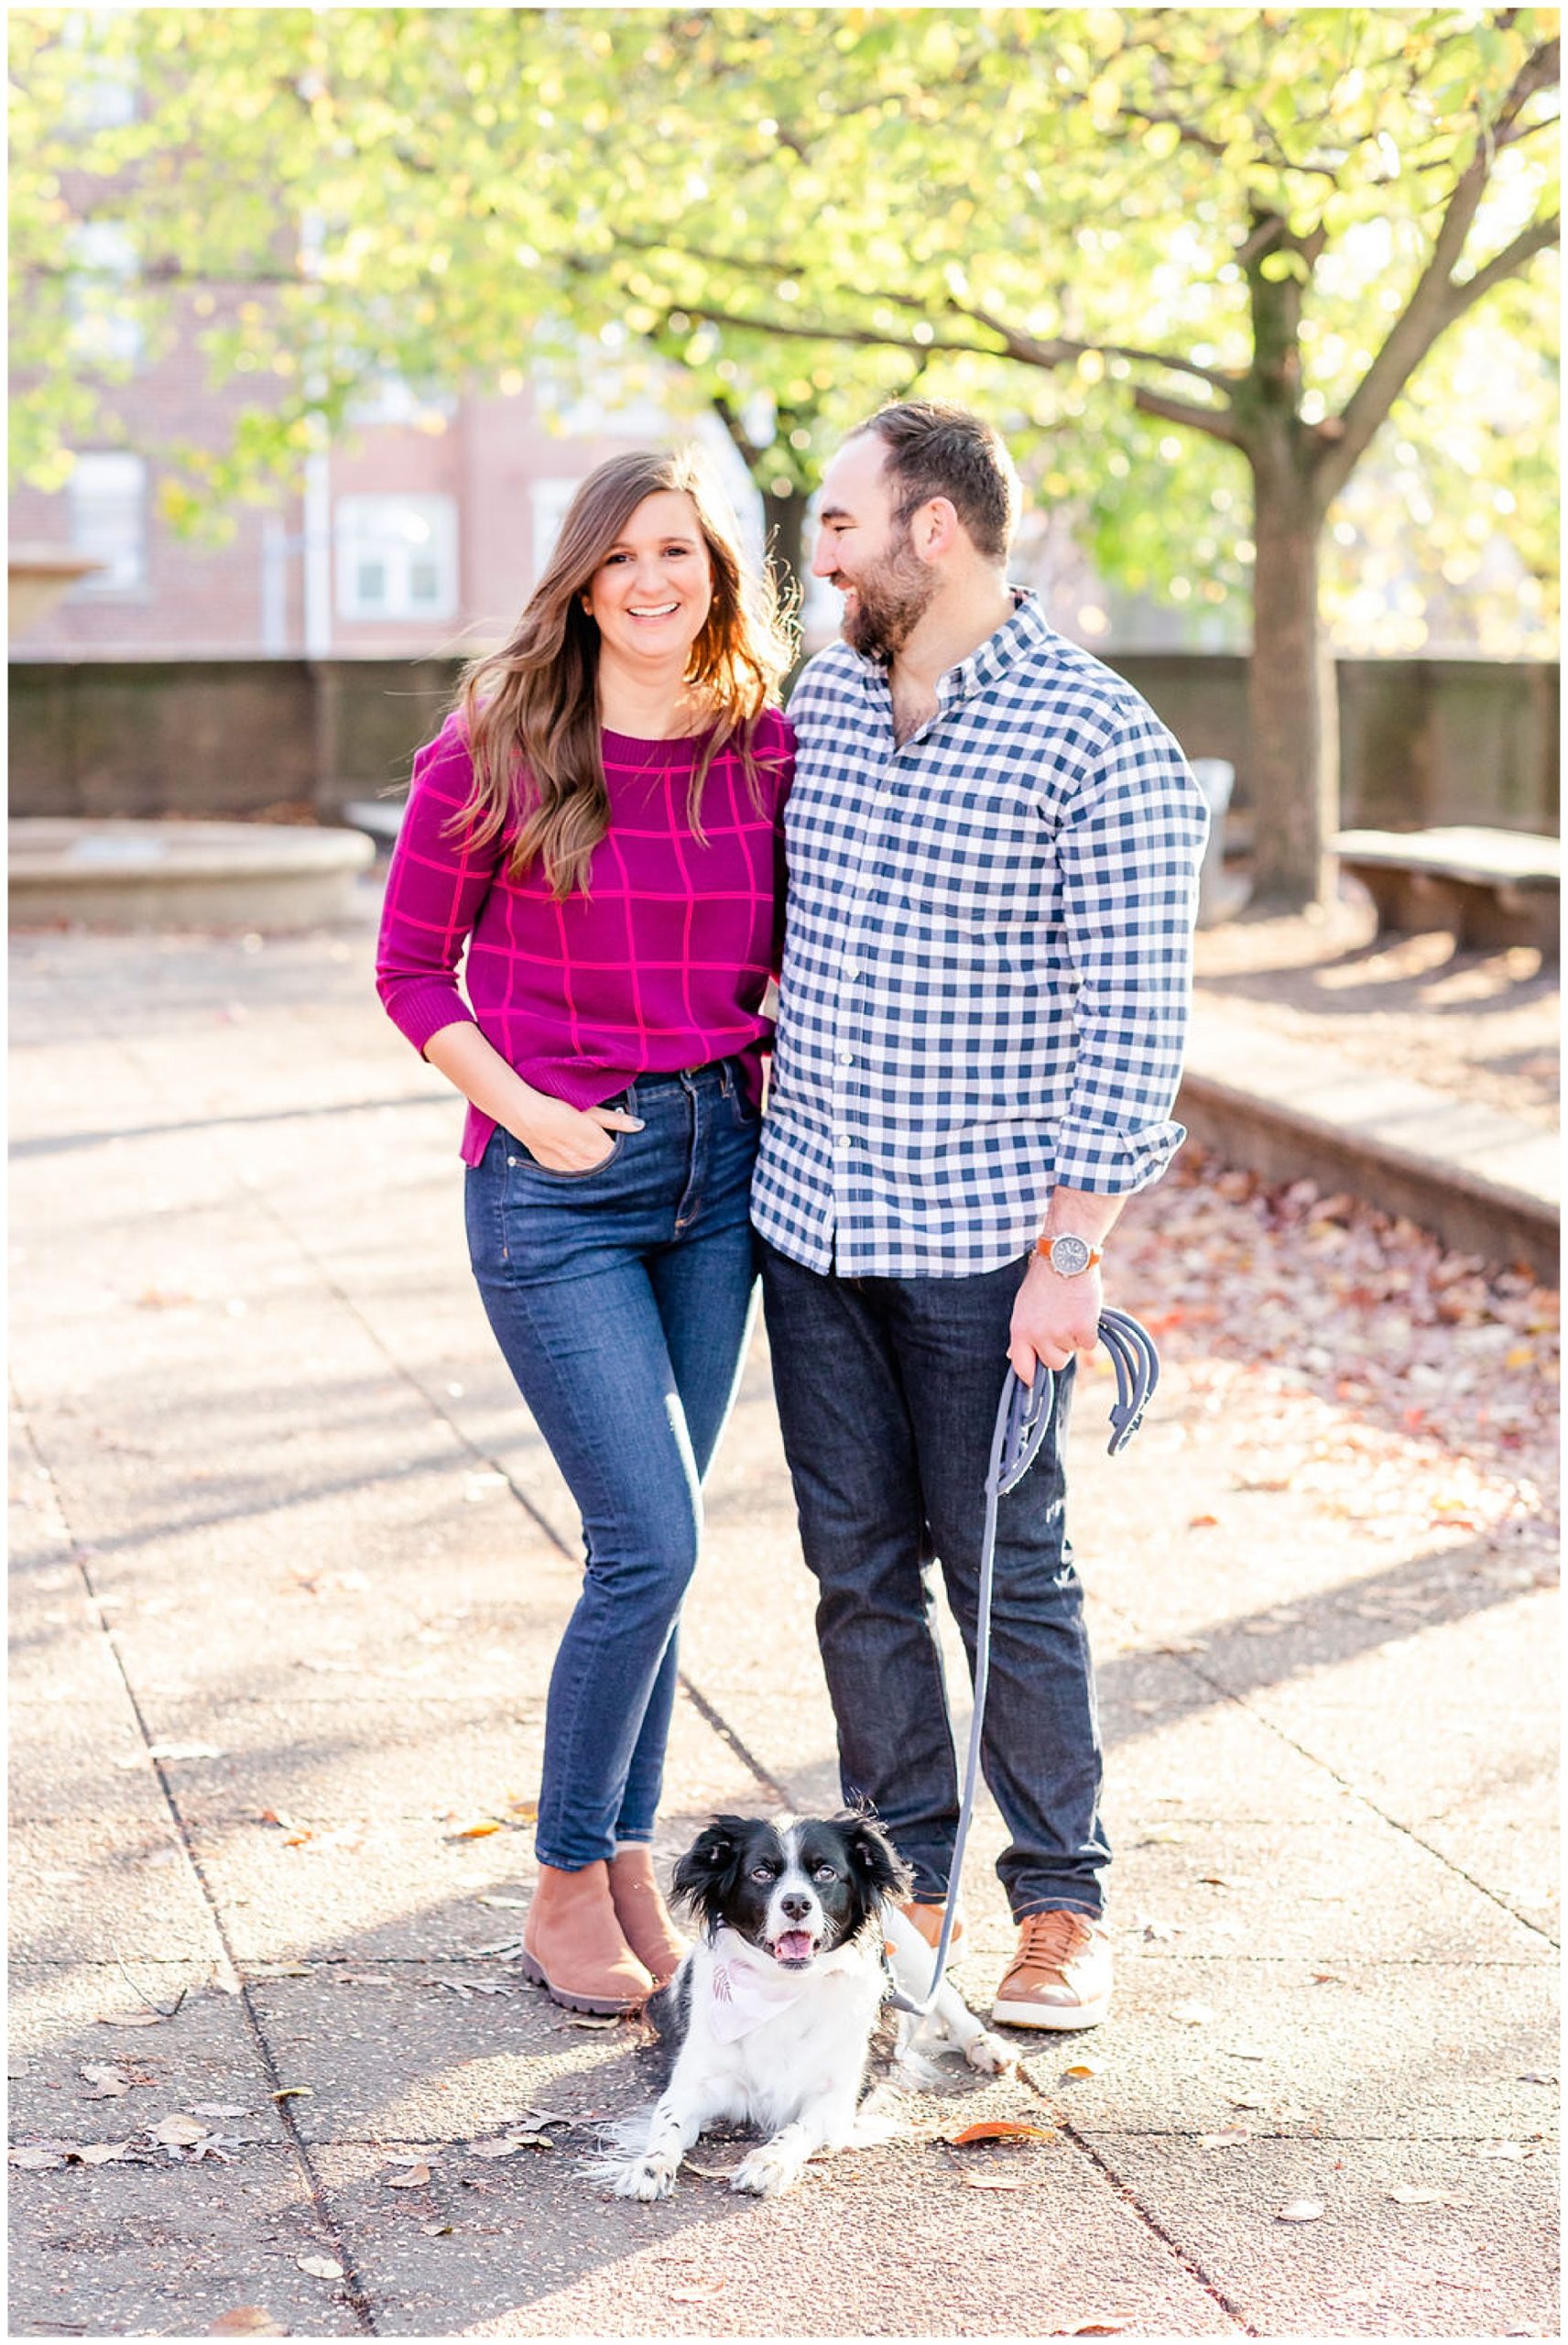 Meridian Hill Park engagement session, Meridian Hill Park DC, DC engagement photography, DC engagement photos, DC engagement session, DC engagement photographer, DC proposal photographer, DC wedding photographer, autumn engagement photos, Rachel E.H. Photography, couple smiling with dog at feet, dog laying on feet